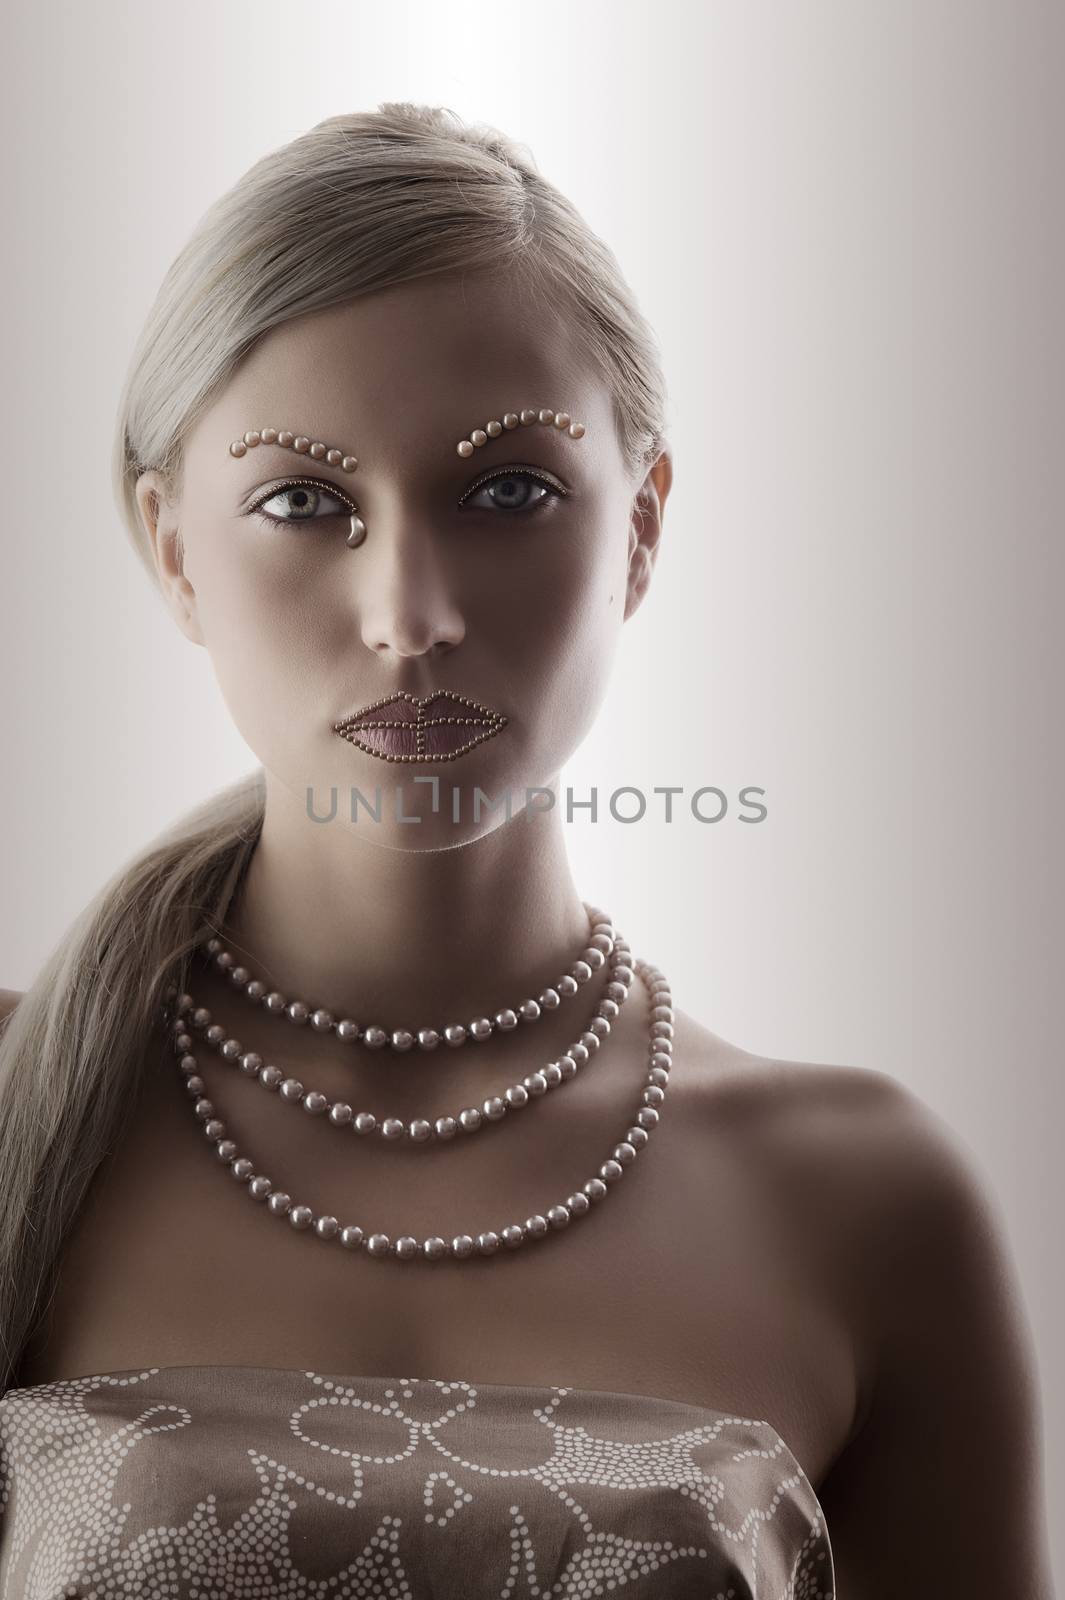 nice portrait with desaturate color of blond woman with necklace